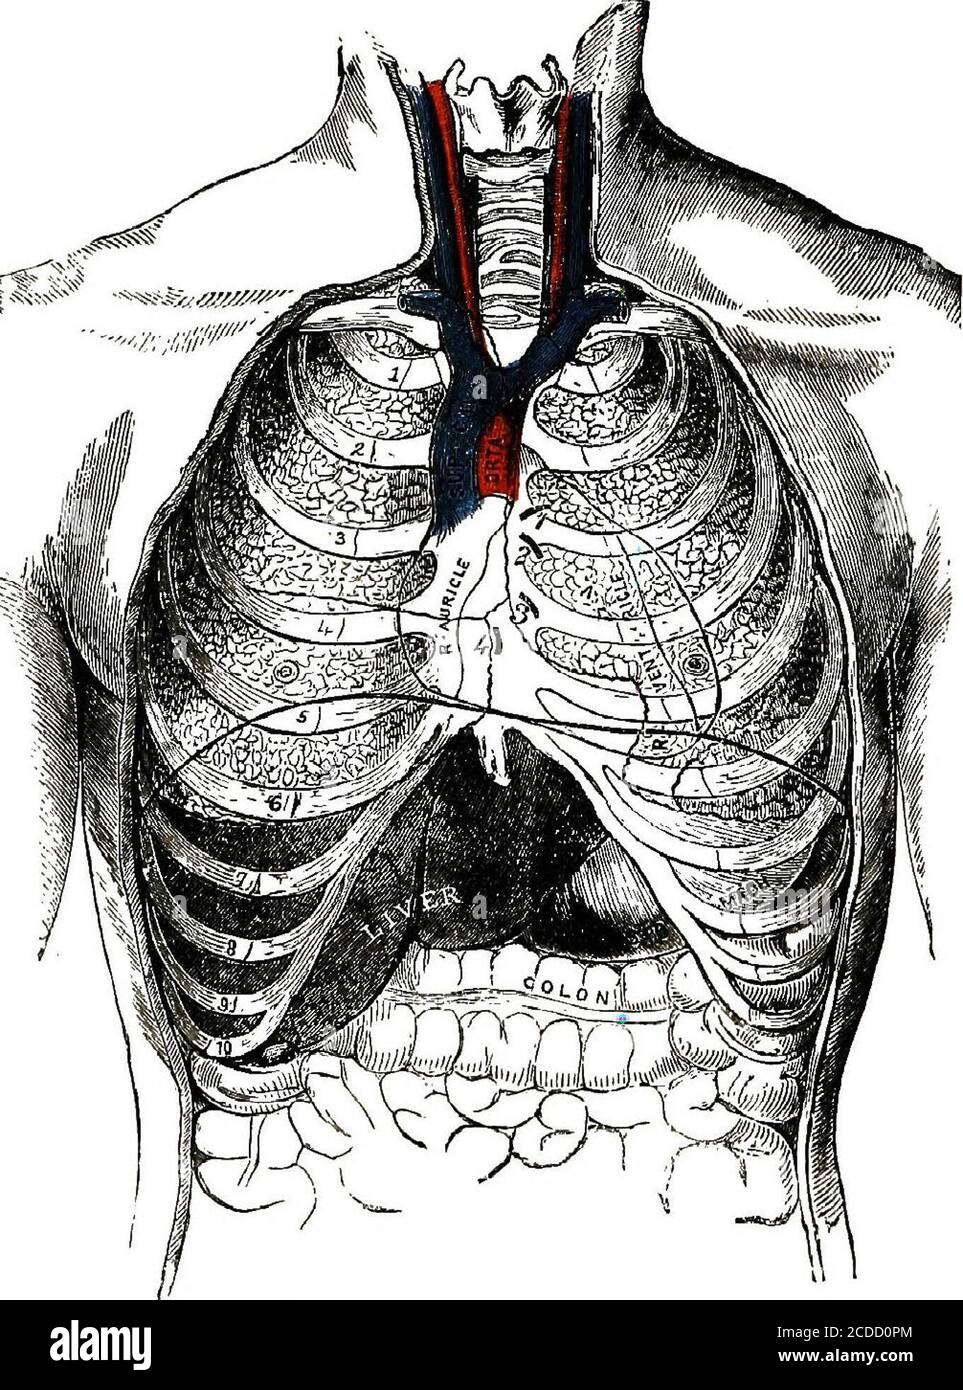 . Physiology, experimental and descriptive . Fig. 39. The Trachea and Bronchial Tubes, ShowingTwo Clusters {Alveoli) of Air Vesicles. 106 ORGANS OF THE THOBAX. around and between the air sacs. These capillaries receivetheir blood from the pulmonary artery, and return it to theheart by the pulmonary veins.. 1, Pulmonary Orifice 2. Aortic Orifice 3. Left Auriculo-Ventricular Orifice 4. Right Auriculo-Ventricular Orifice Fig. 40. Front View of the Thorax. The Ribs and Sternum are Represented inRelation to the Lungs, Heart, and other internal Organs. CILIATED CELLS. 107 ? The air vesicles, with th Stock Photo